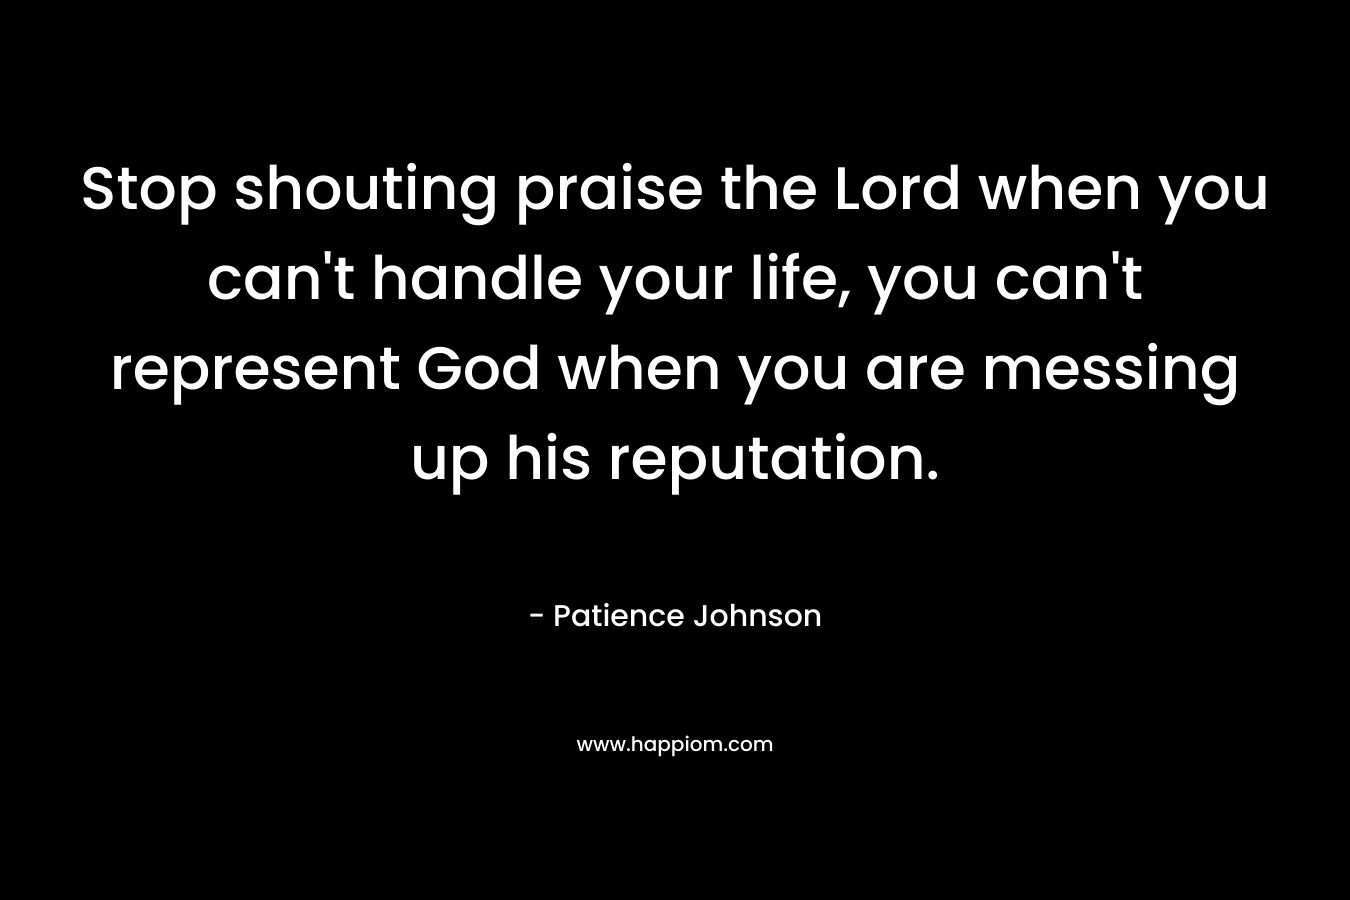 Stop shouting praise the Lord when you can’t handle your life, you can’t represent God when you are messing up his reputation. – Patience Johnson